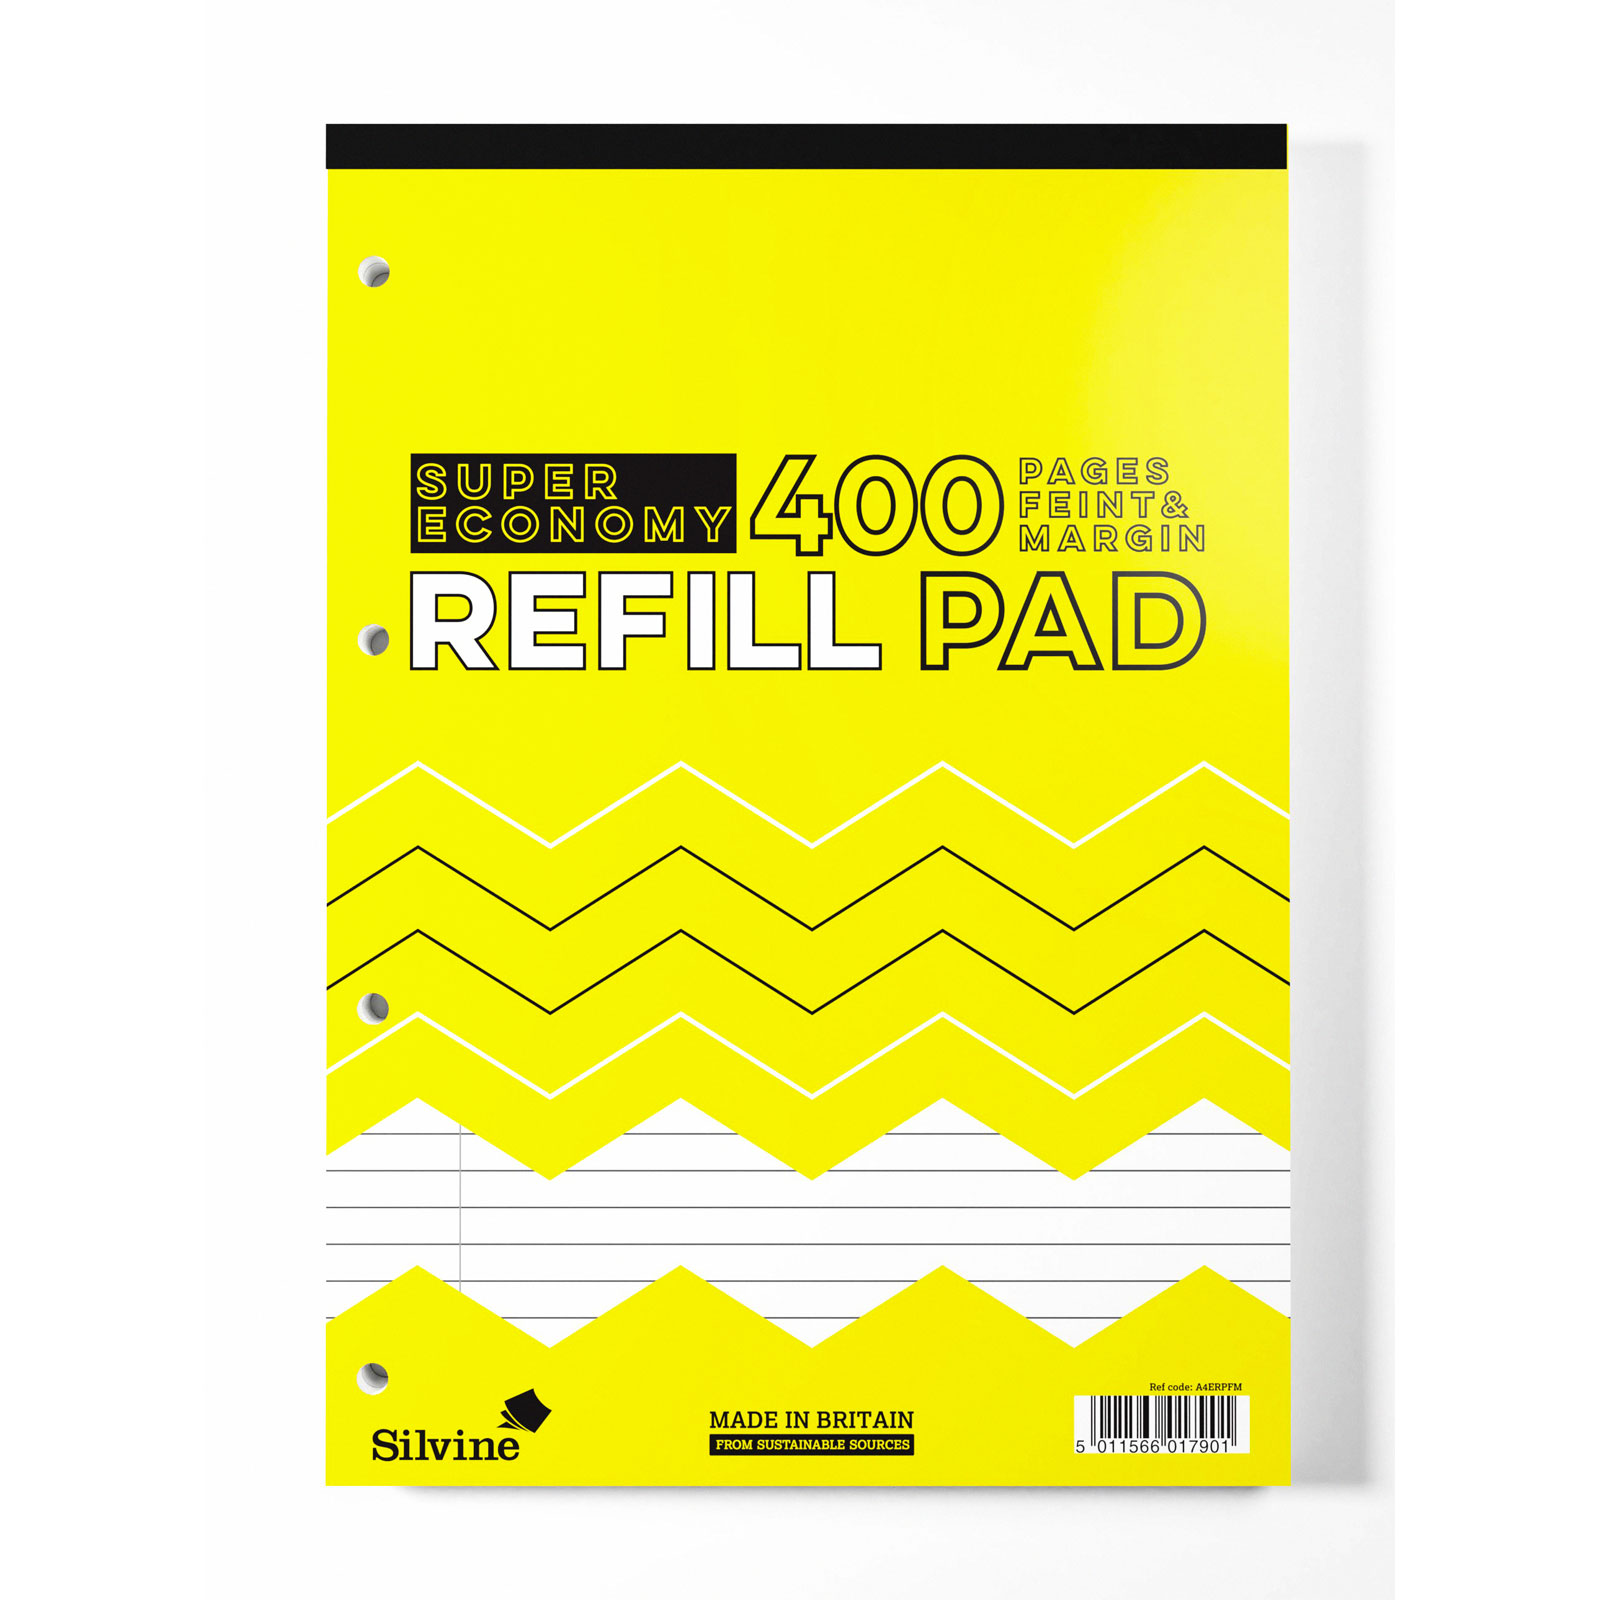 A4 Super Econ Refill Pad, 400 pages, Feint & Margin (Yellow cover)